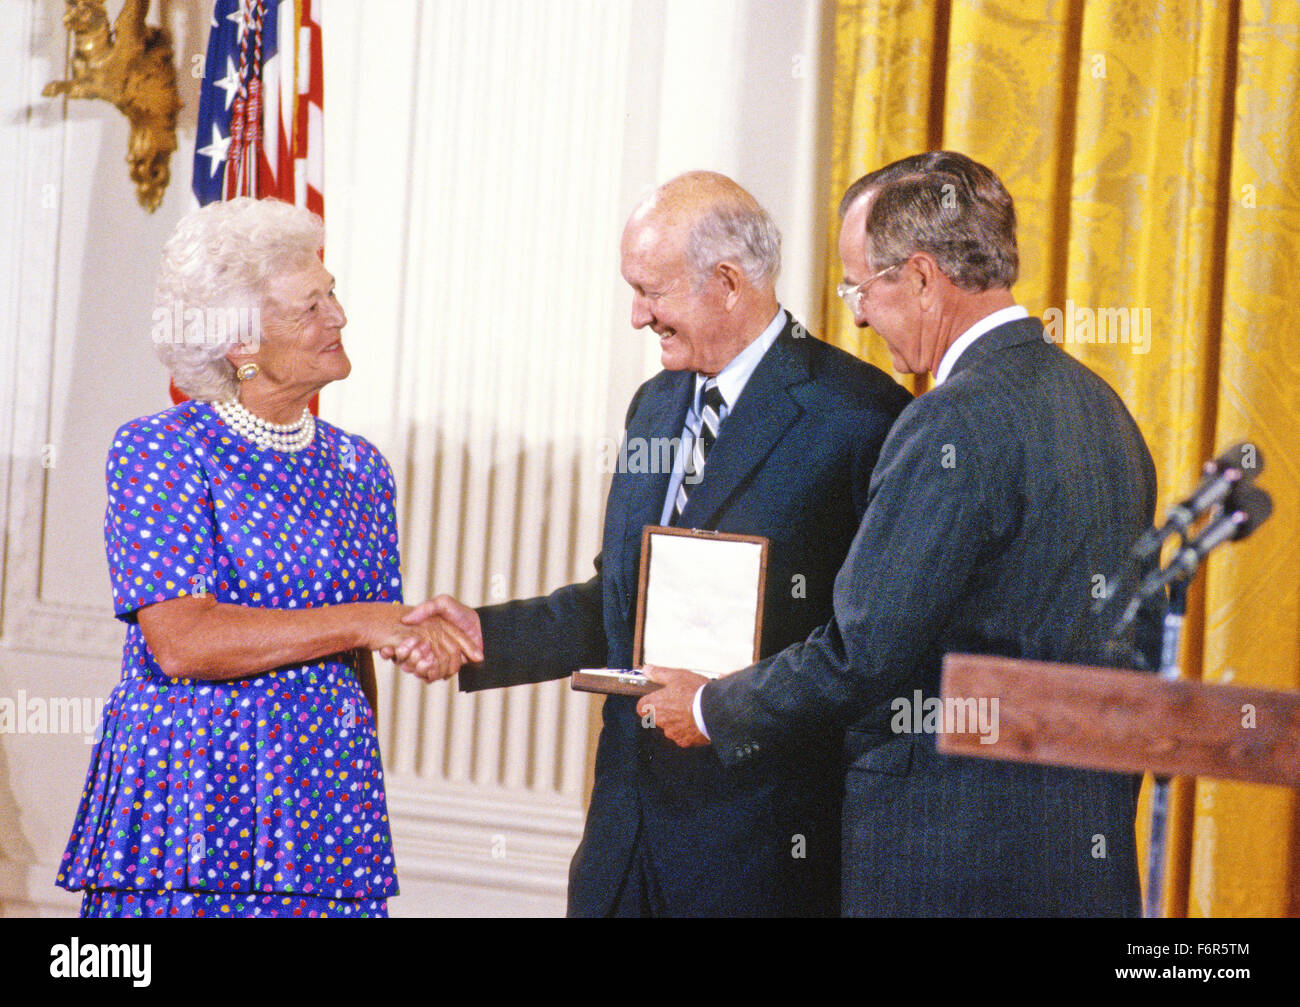 C. Douglas Dillon, American diplomat and politician, who served both as United States Ambassador to France and as the 57th Secretary of the Treasury, center, is awarded the Presidential Medal of Freedom, the highest civilian award of the United States, by US President George H.W. Bush, right, and first lady Barbara Bush, left, in a ceremony in the East Room of the White House in Washington, DC on July 6, 1989. Credit: Ron Sachs/CNP - NO WIRE SERVICE - Stock Photo